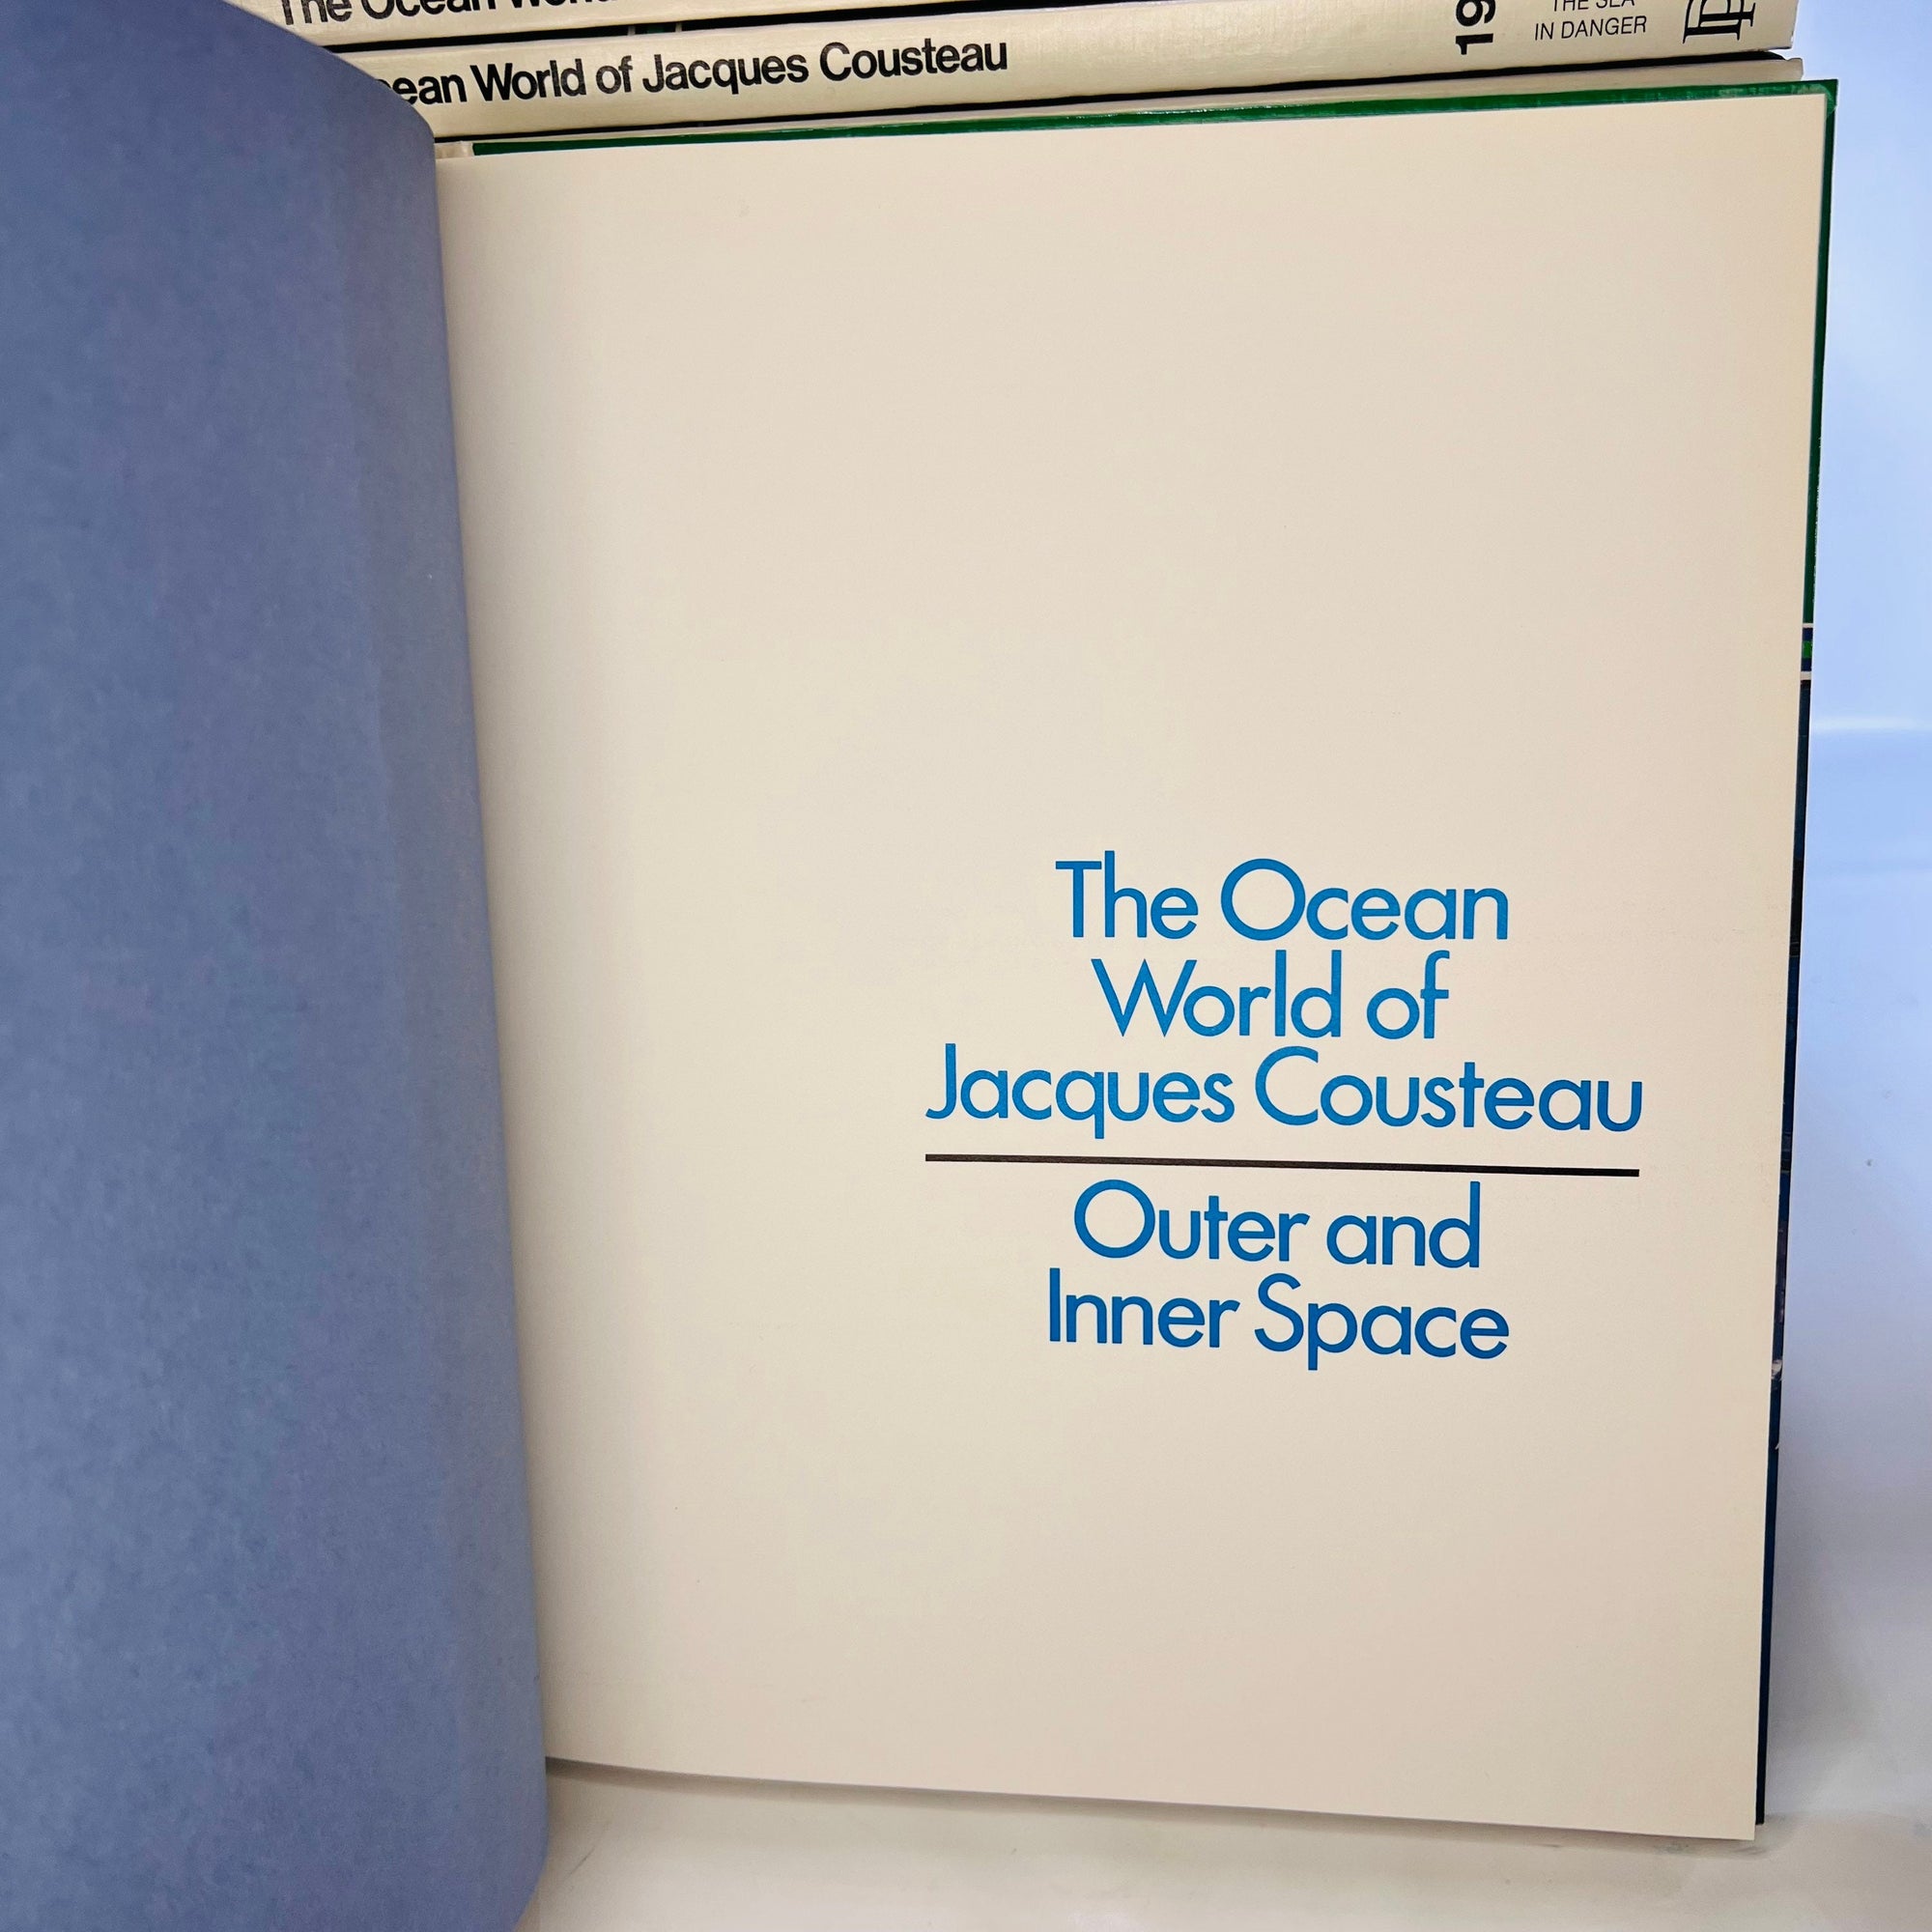 The Ocean World of Jacques Cousteau 20 Hardcover Book Set 1973 First Printing The Danbury Press Vintage Books by Famous Explorer Ecologist